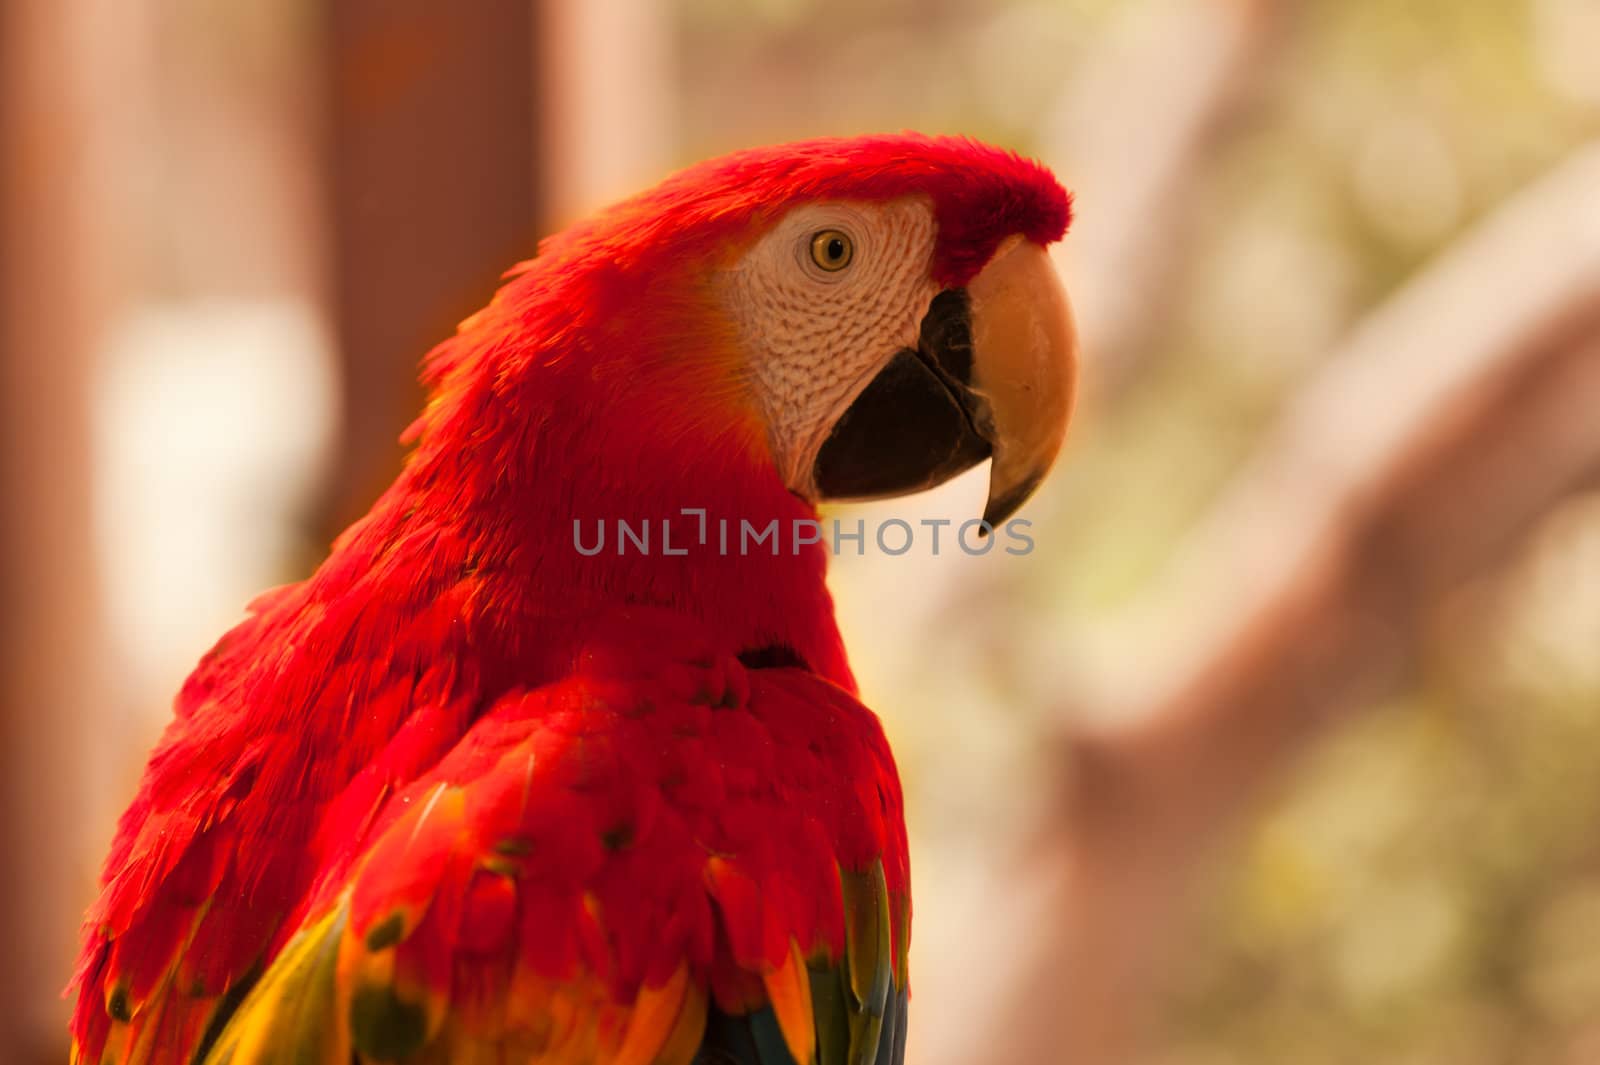 Wild red parrot on the tree by oguzdkn